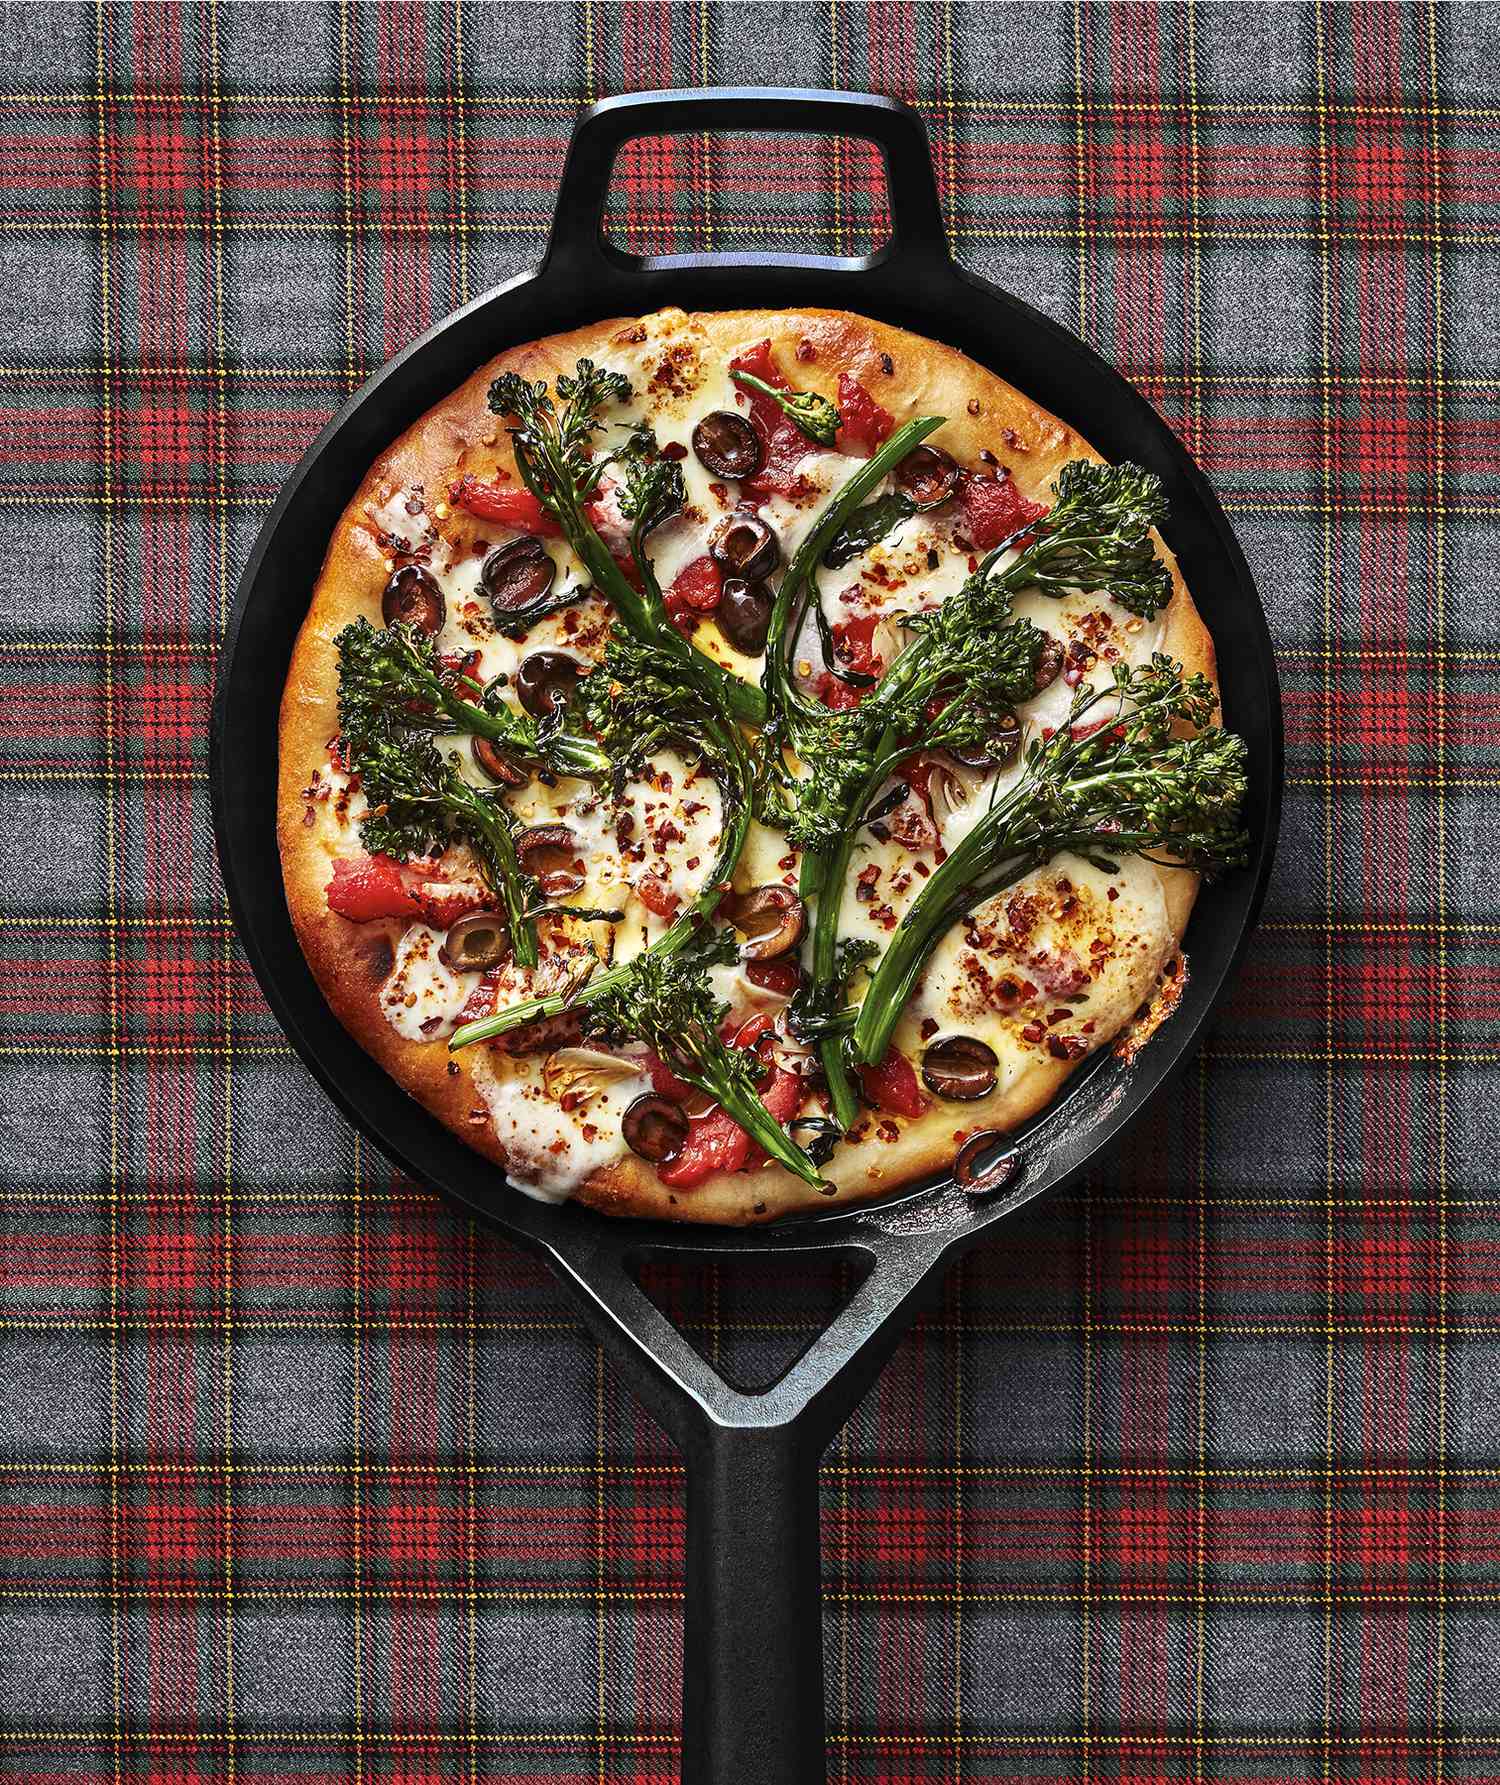 Broccolini and Olive Skillet Pizza